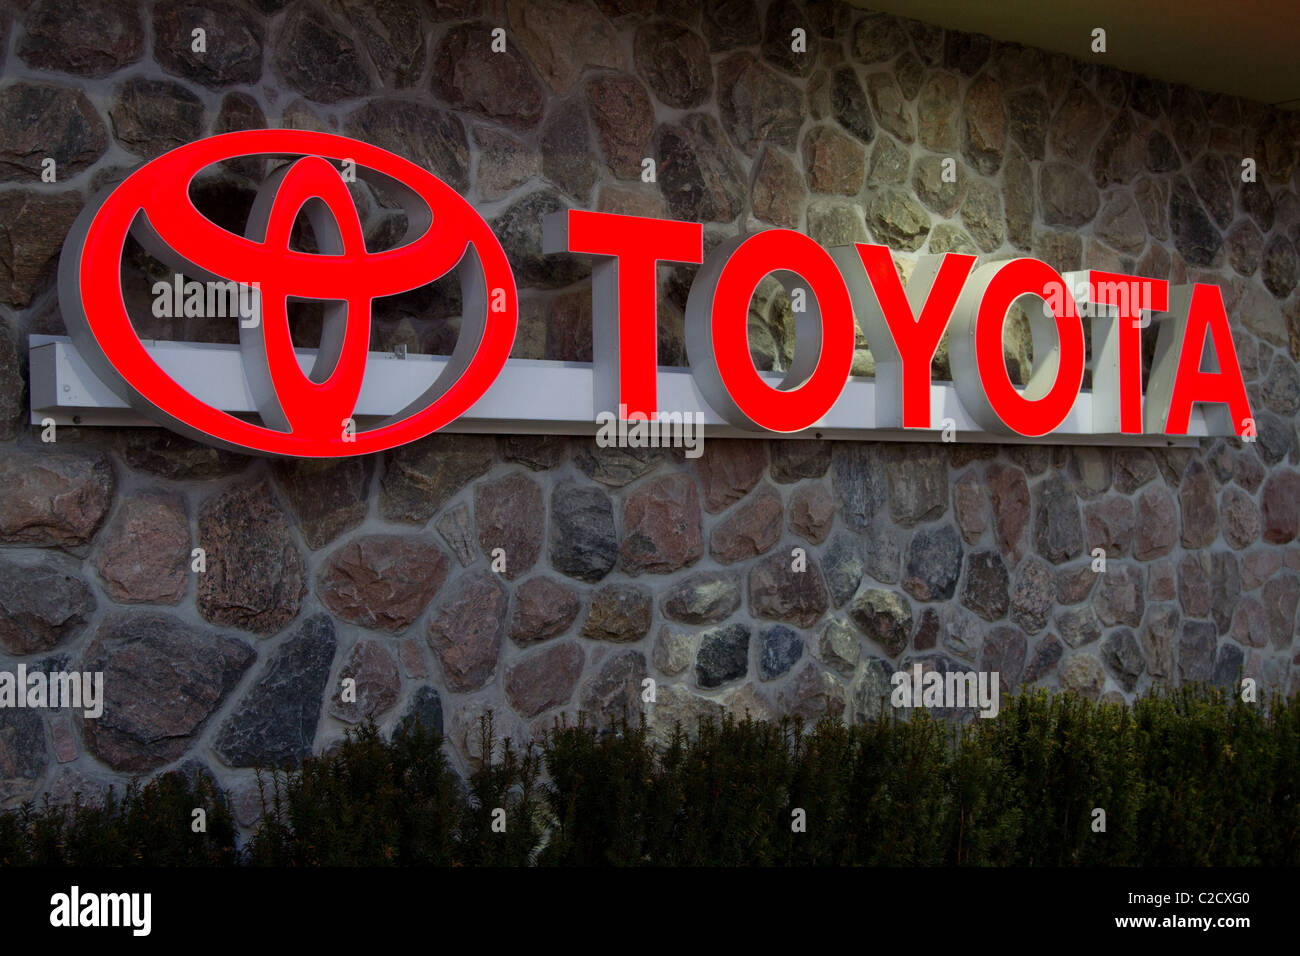 Concessionnaire Toyota logo brickwall neon sign Banque D'Images